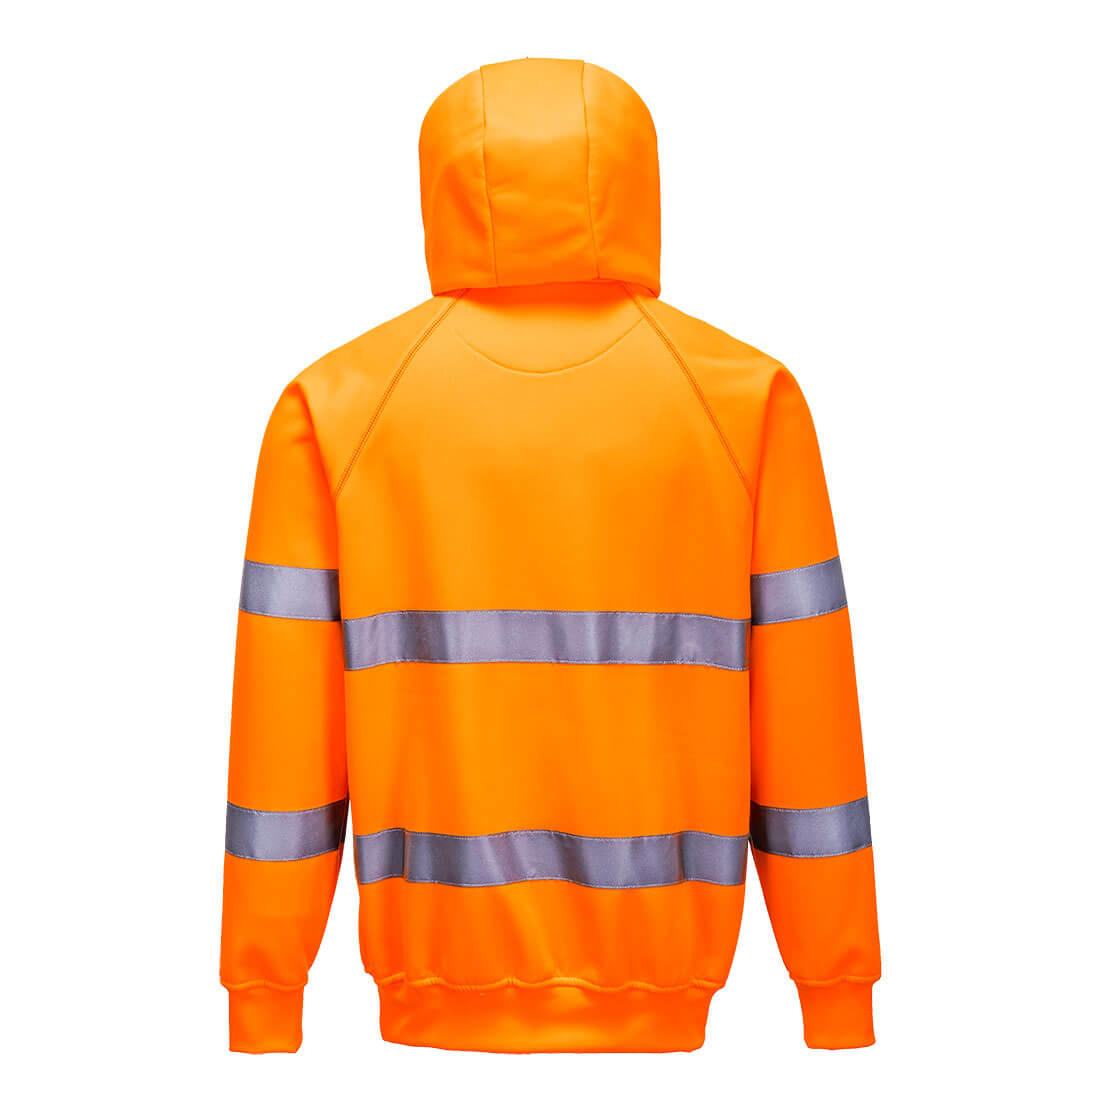 Portwest Hi Vis Visibility Zipped Hoodie Sweater Jumper Reflective Workwear B305 